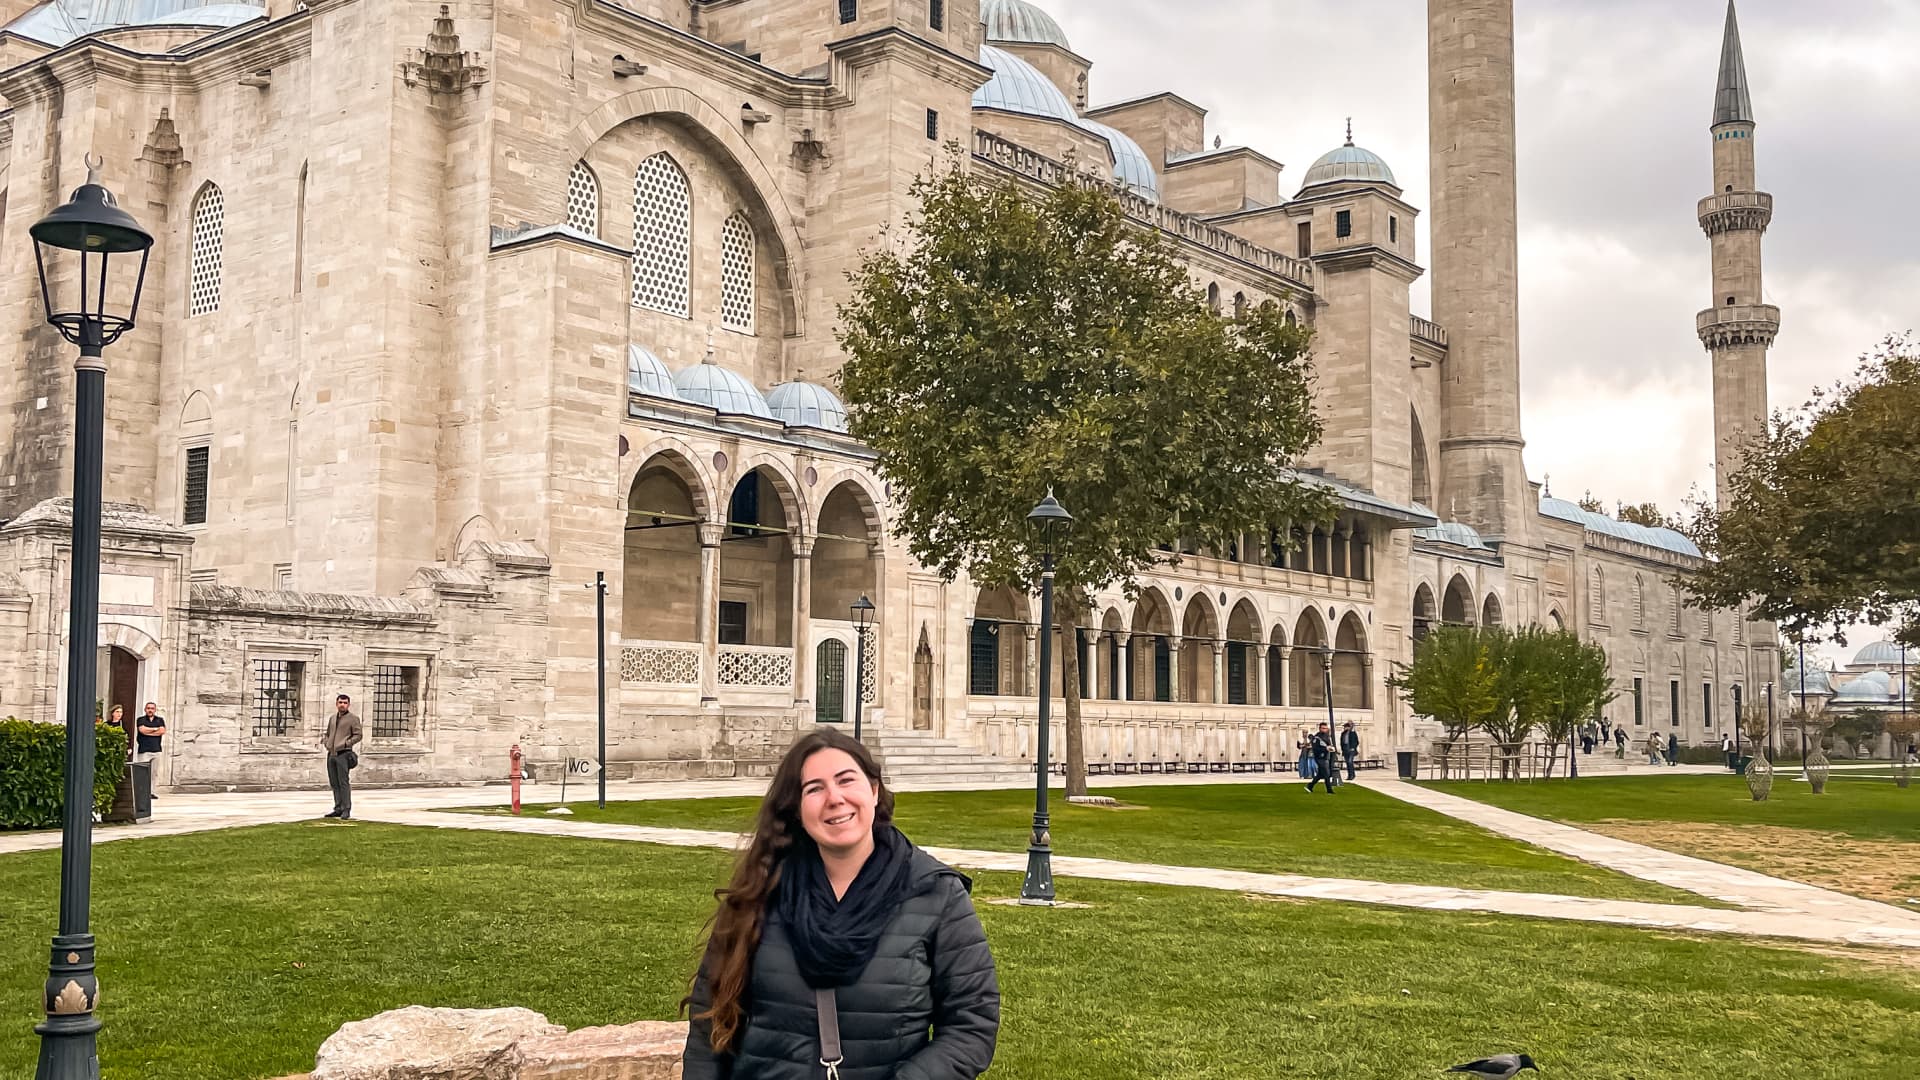 Elaina Vieira says Istanbul should be on everyone's travel list, especially because of its unique Byzantine architecture.